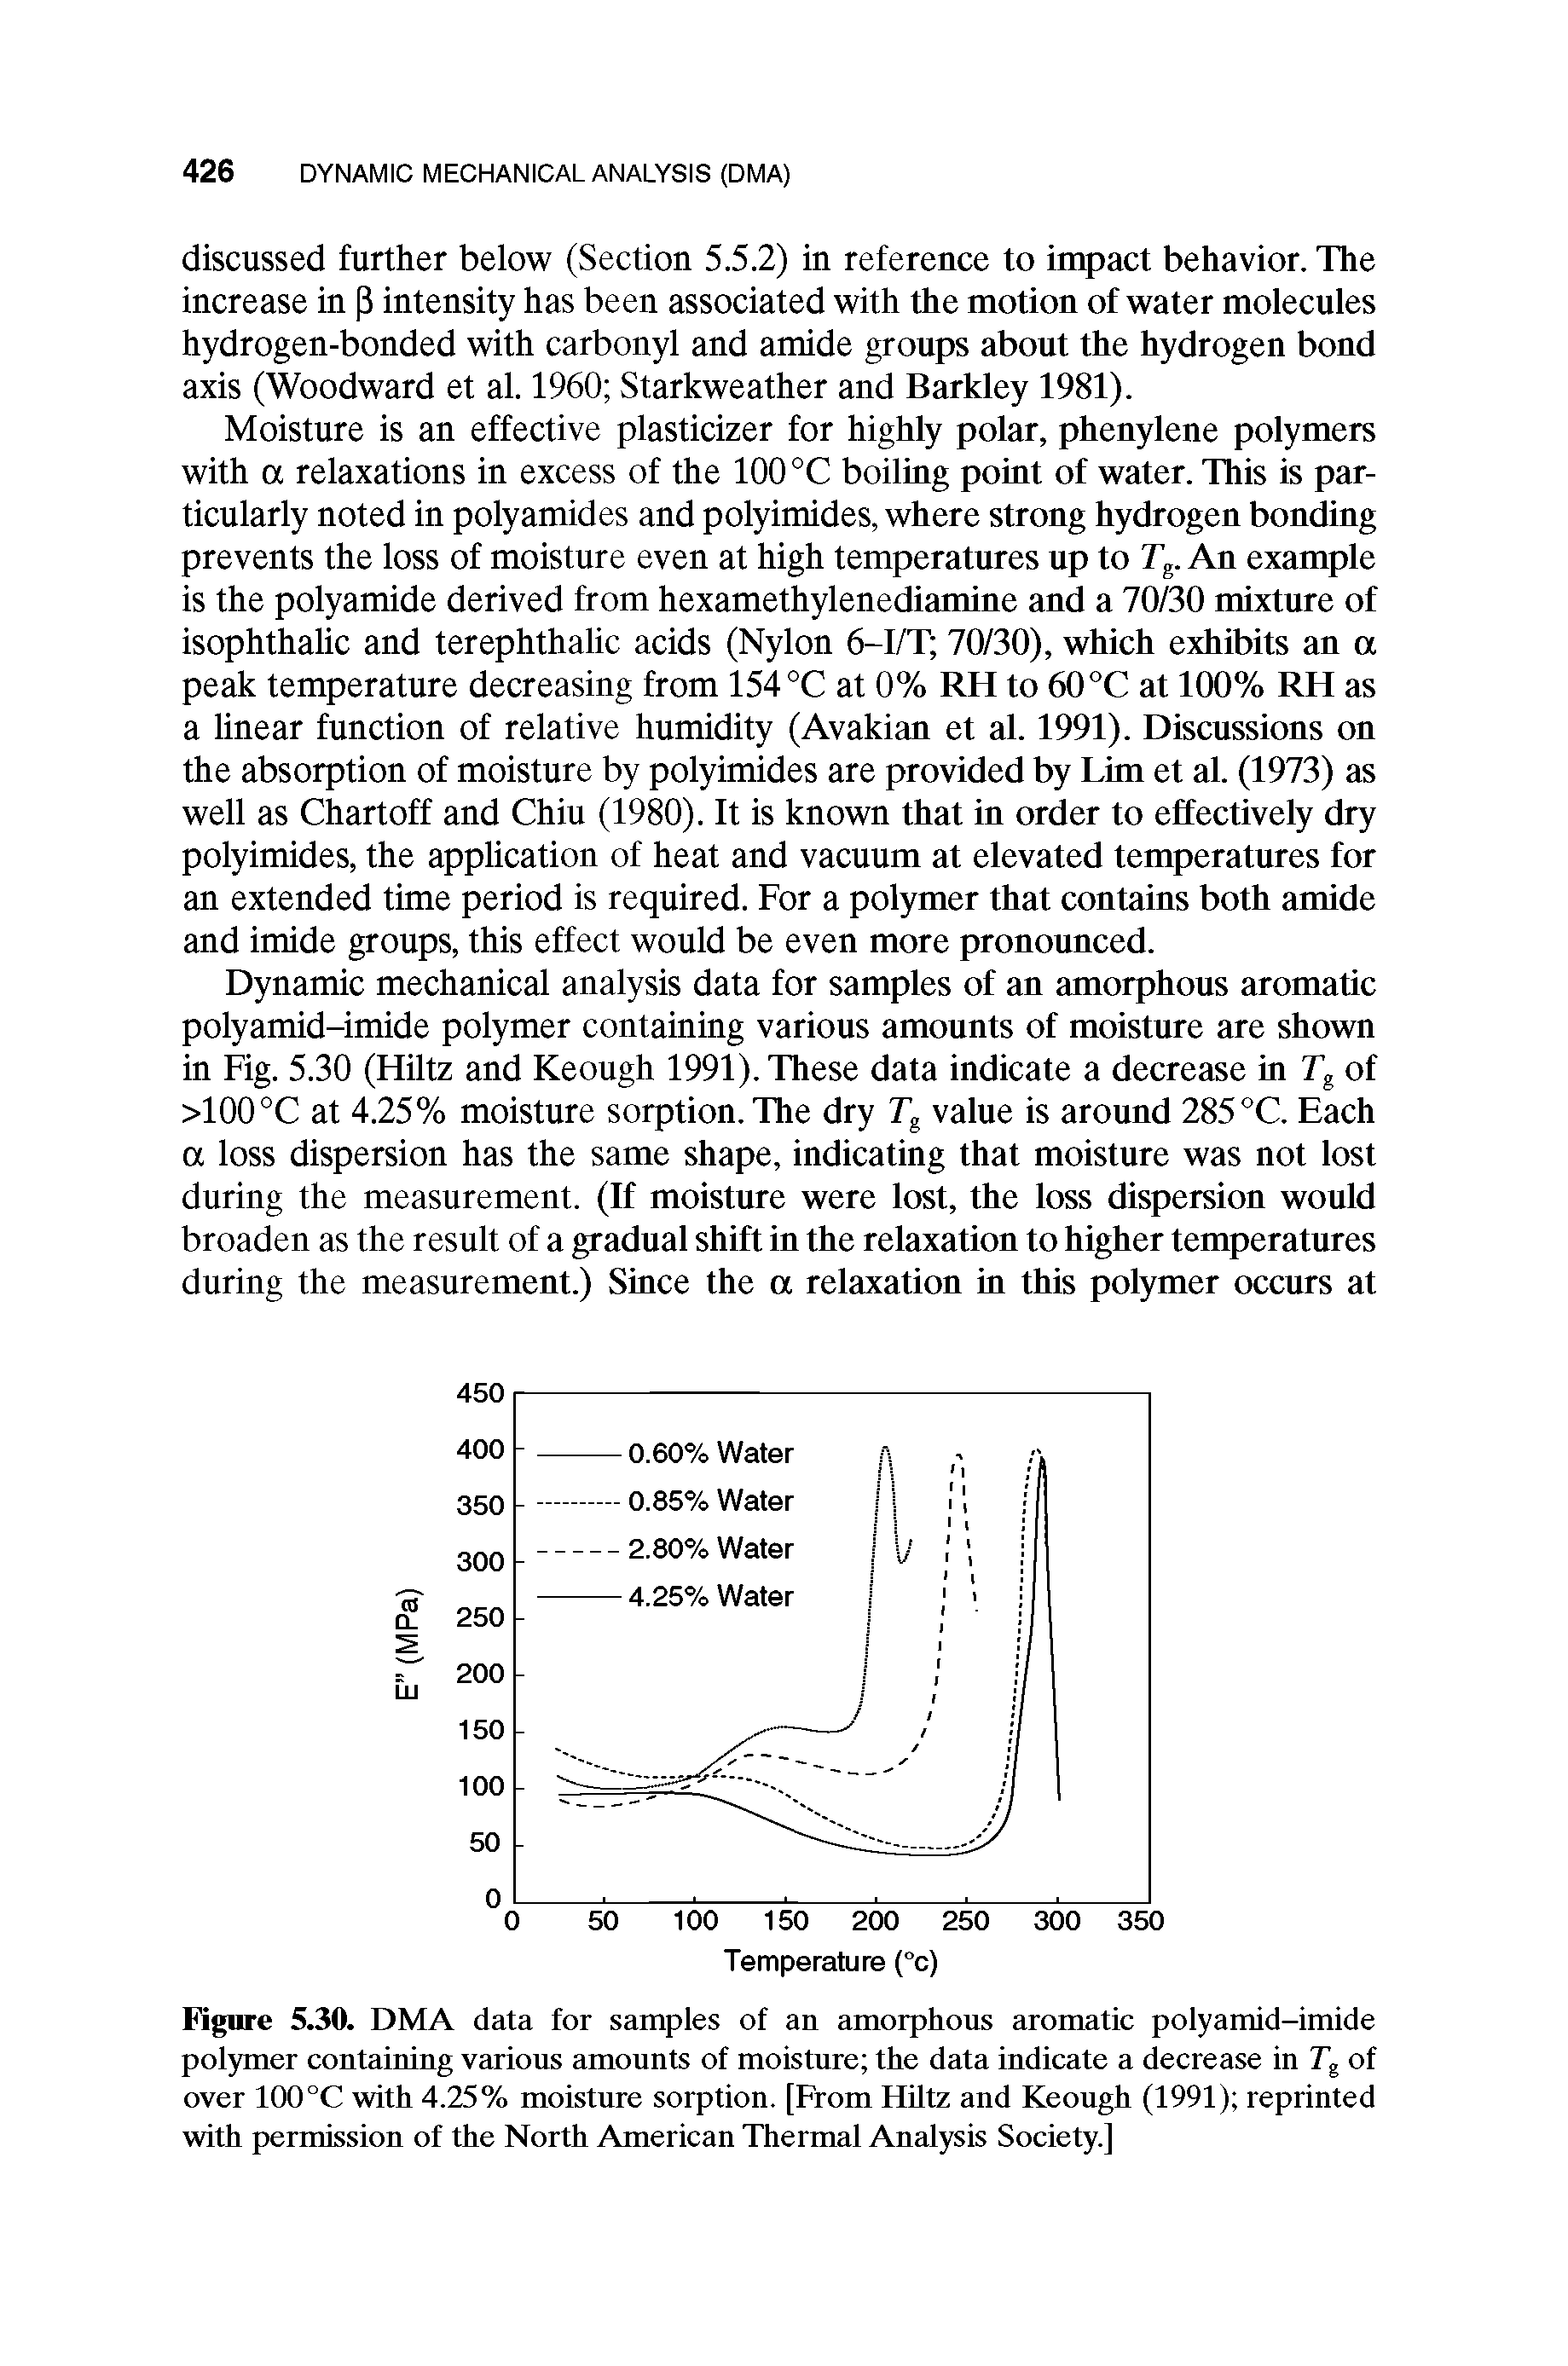 Figure 530. DMA data for samples of an amorphous aromatic polyamid-imide polymer containing various amounts of moisture the data indicate a decrease in Tg of over 100°C with 4.25% moisture sorption. [From Hiltz and Keough (1991) reprinted with permission of the North American Thermal Analysis Society.]...